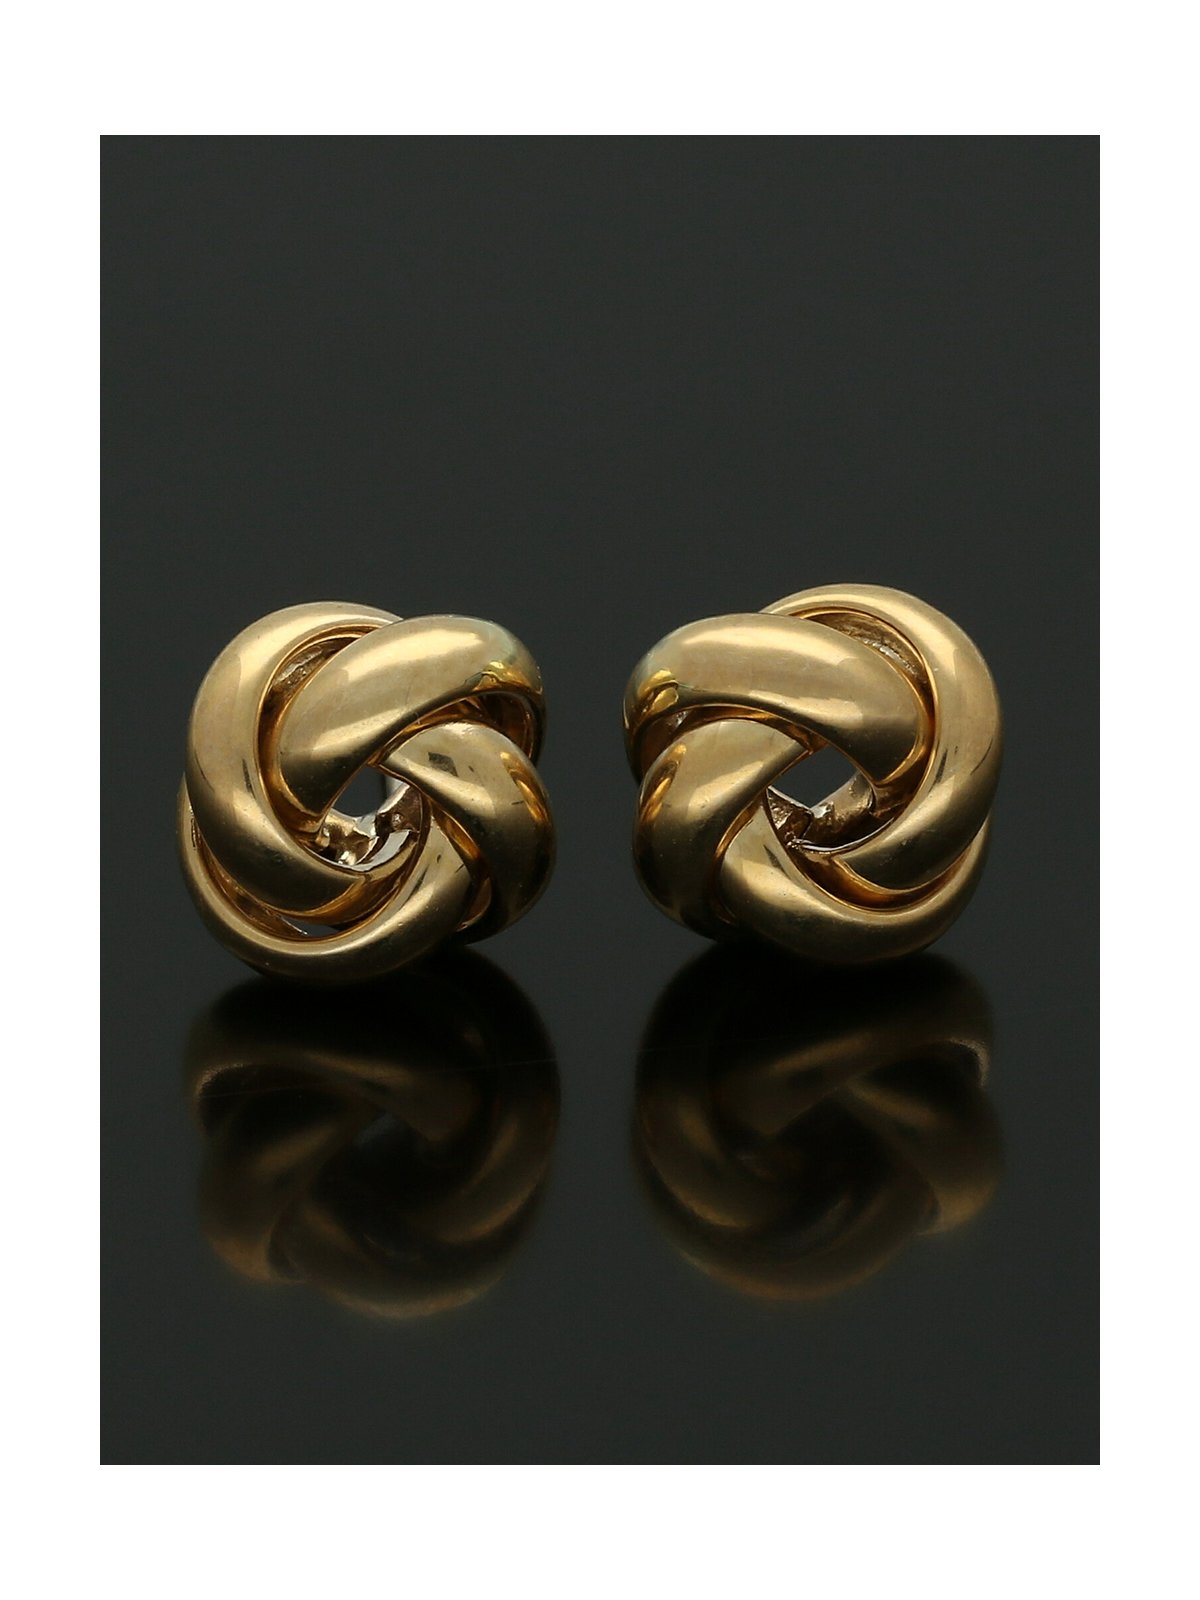 Ribbon Knot Stud Earrings 8mm in 9ct Yellow Gold